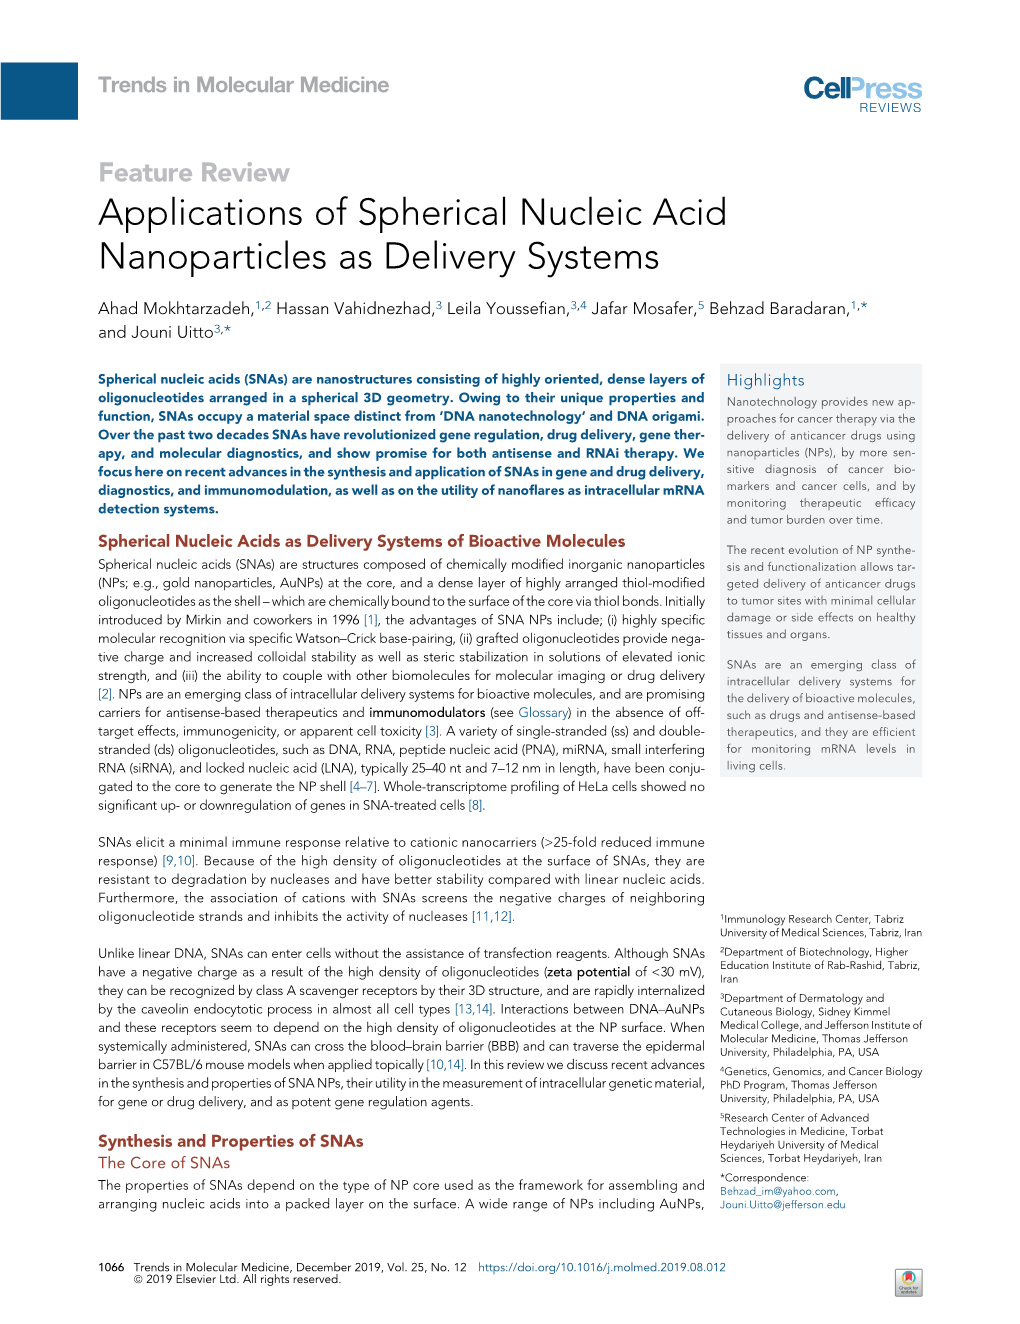 Applications of Spherical Nucleic Acid Nanoparticles As Delivery Systems